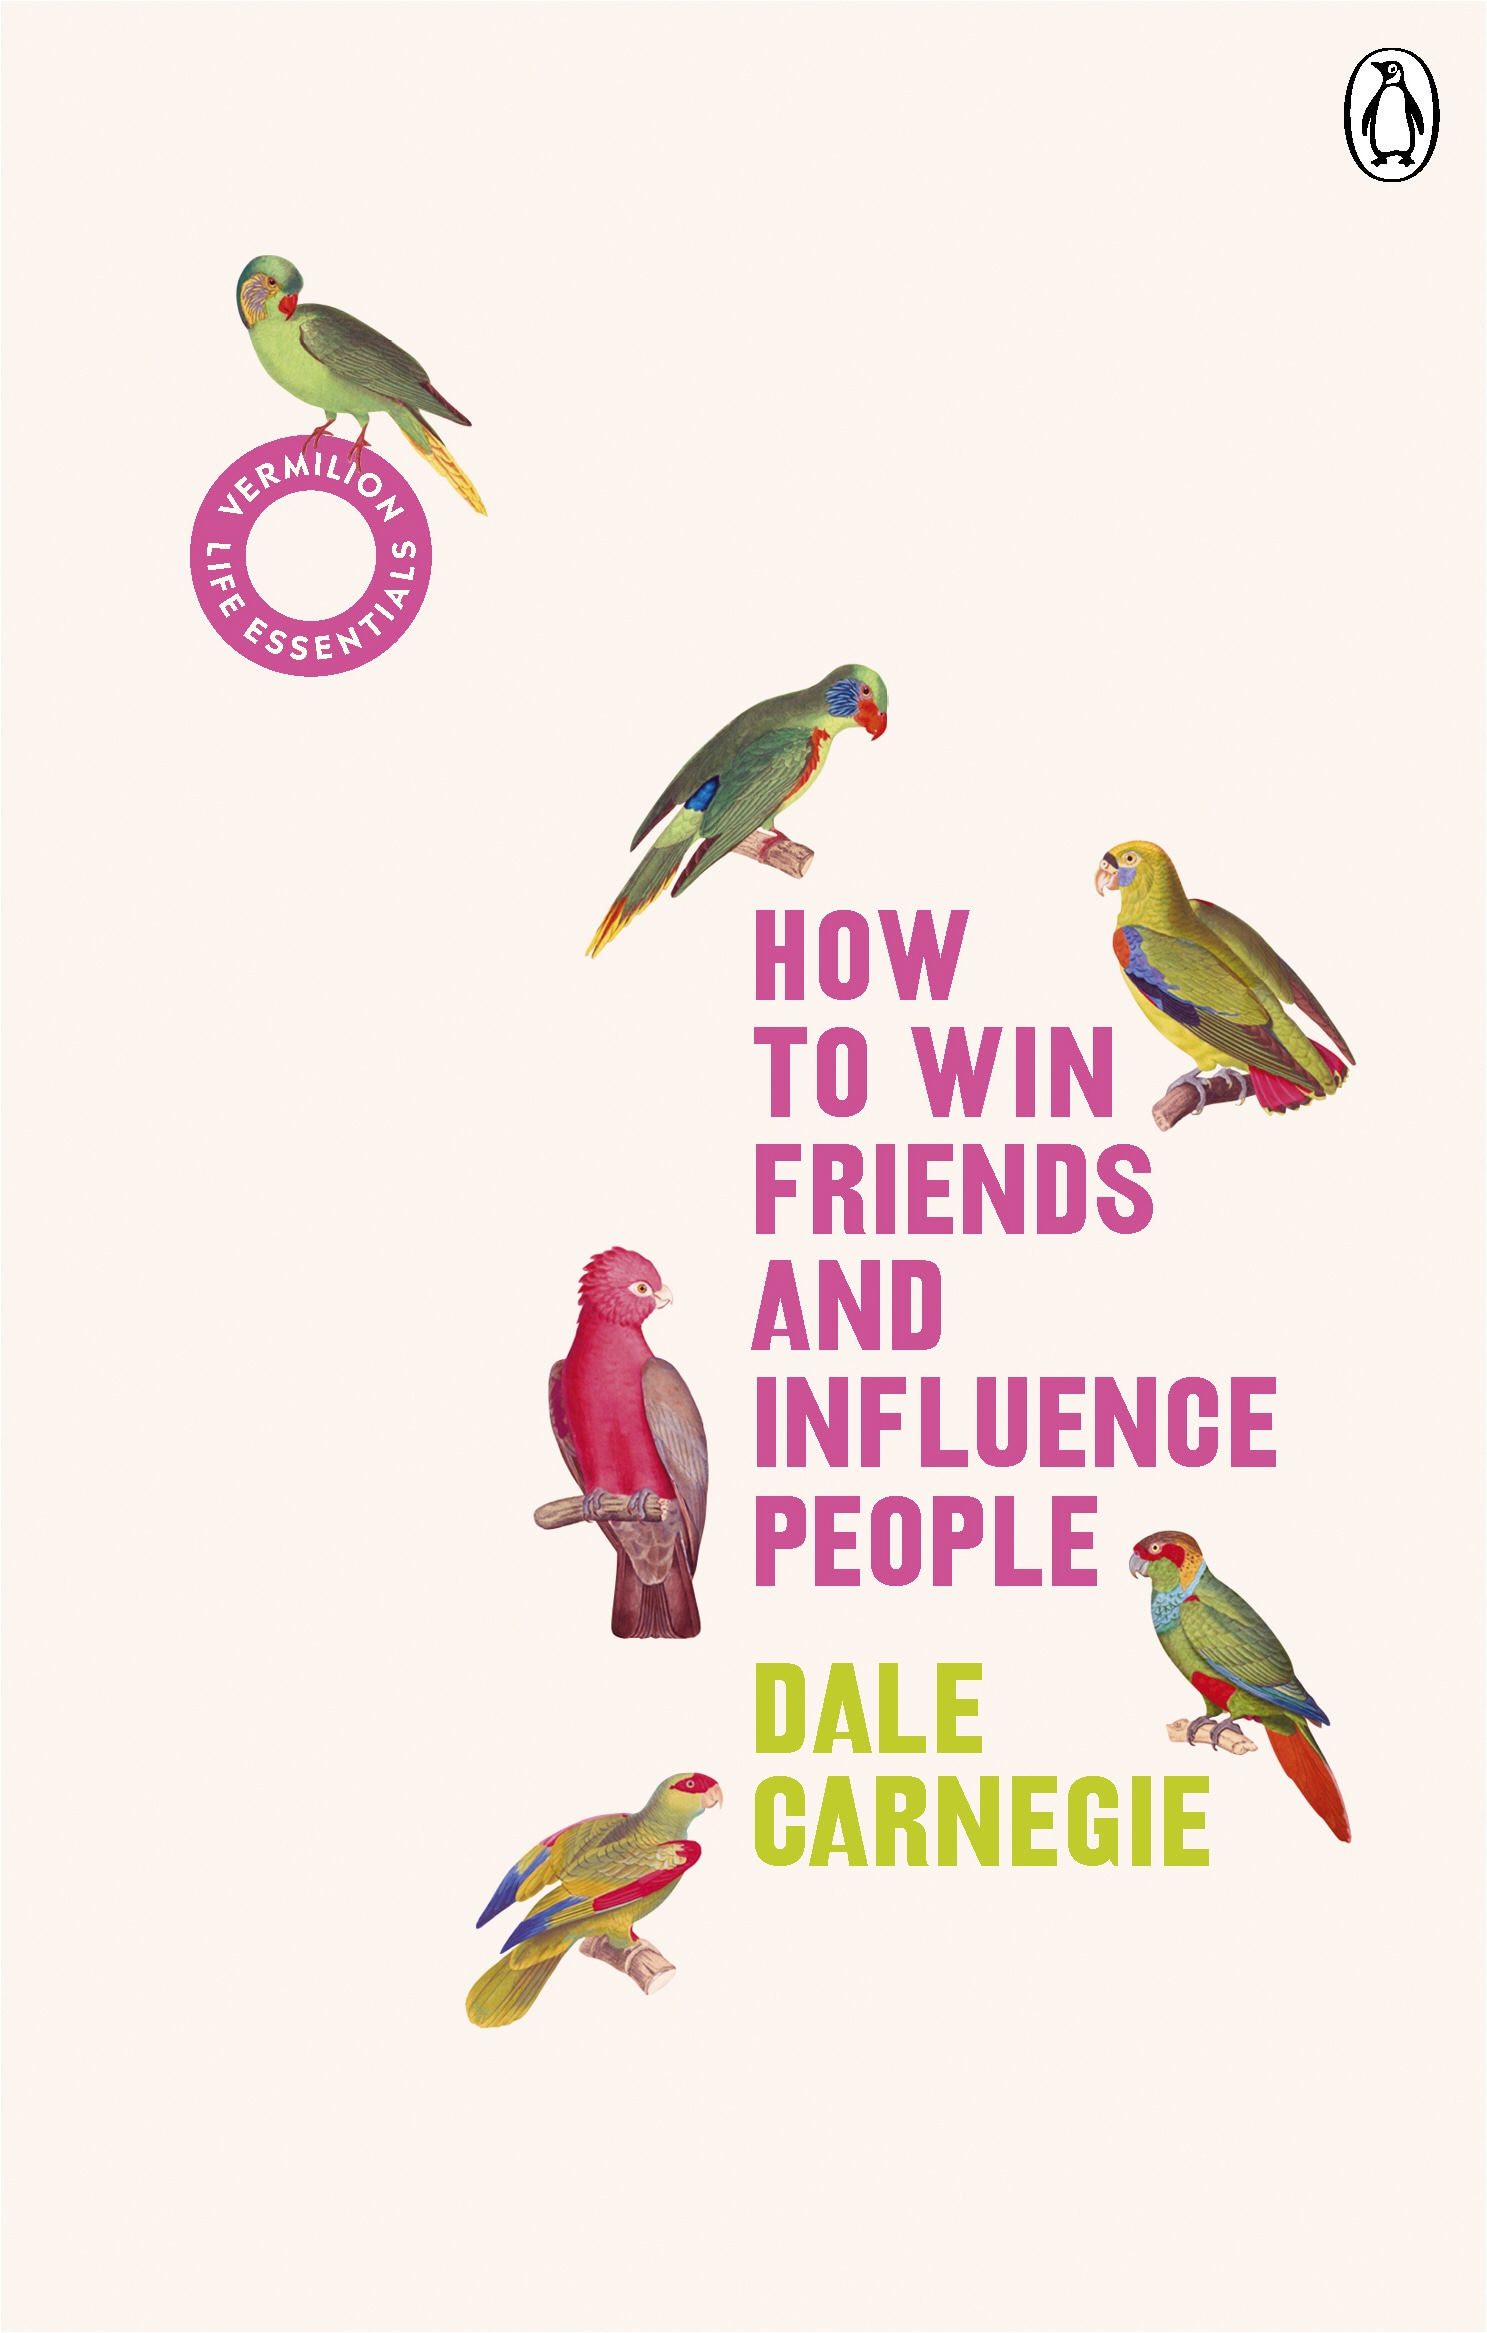 Book “How to Win Friends and Influence People” by Dale Carnegie — August 8, 2019